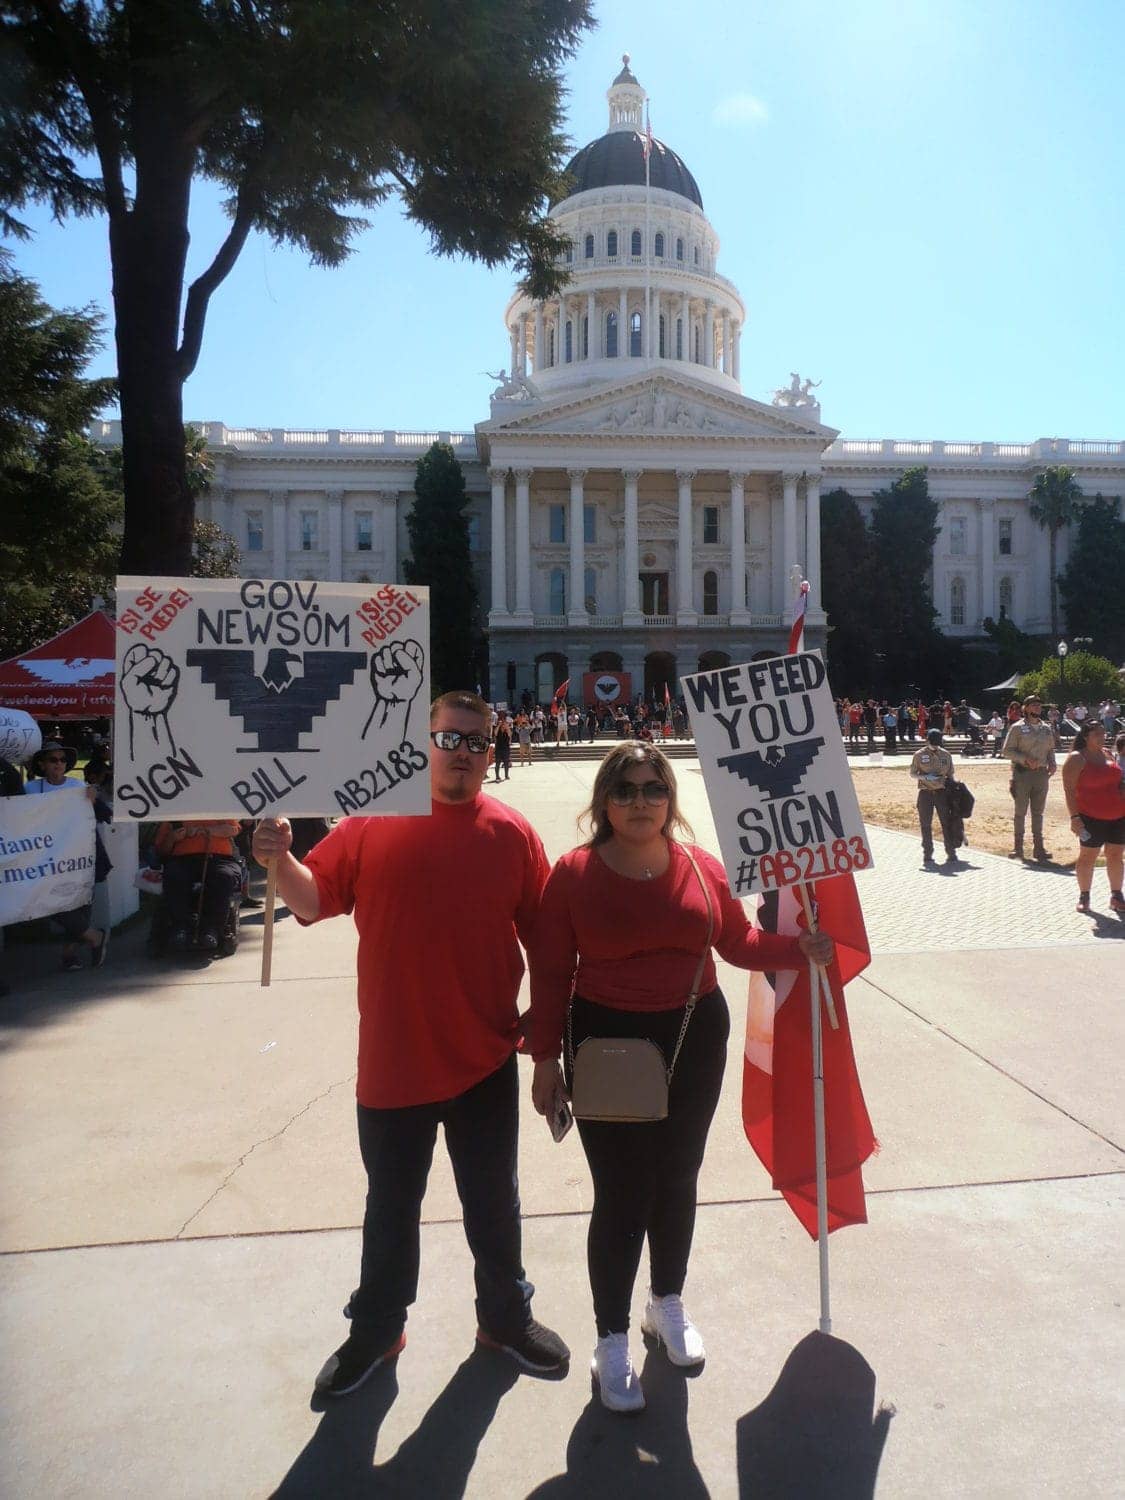 Teamsters-Mark-and-Jessica-from-Modesto-UFW-march-0822, Sign the damn AB 2183 bill, Newsom!, Featured News & Views 